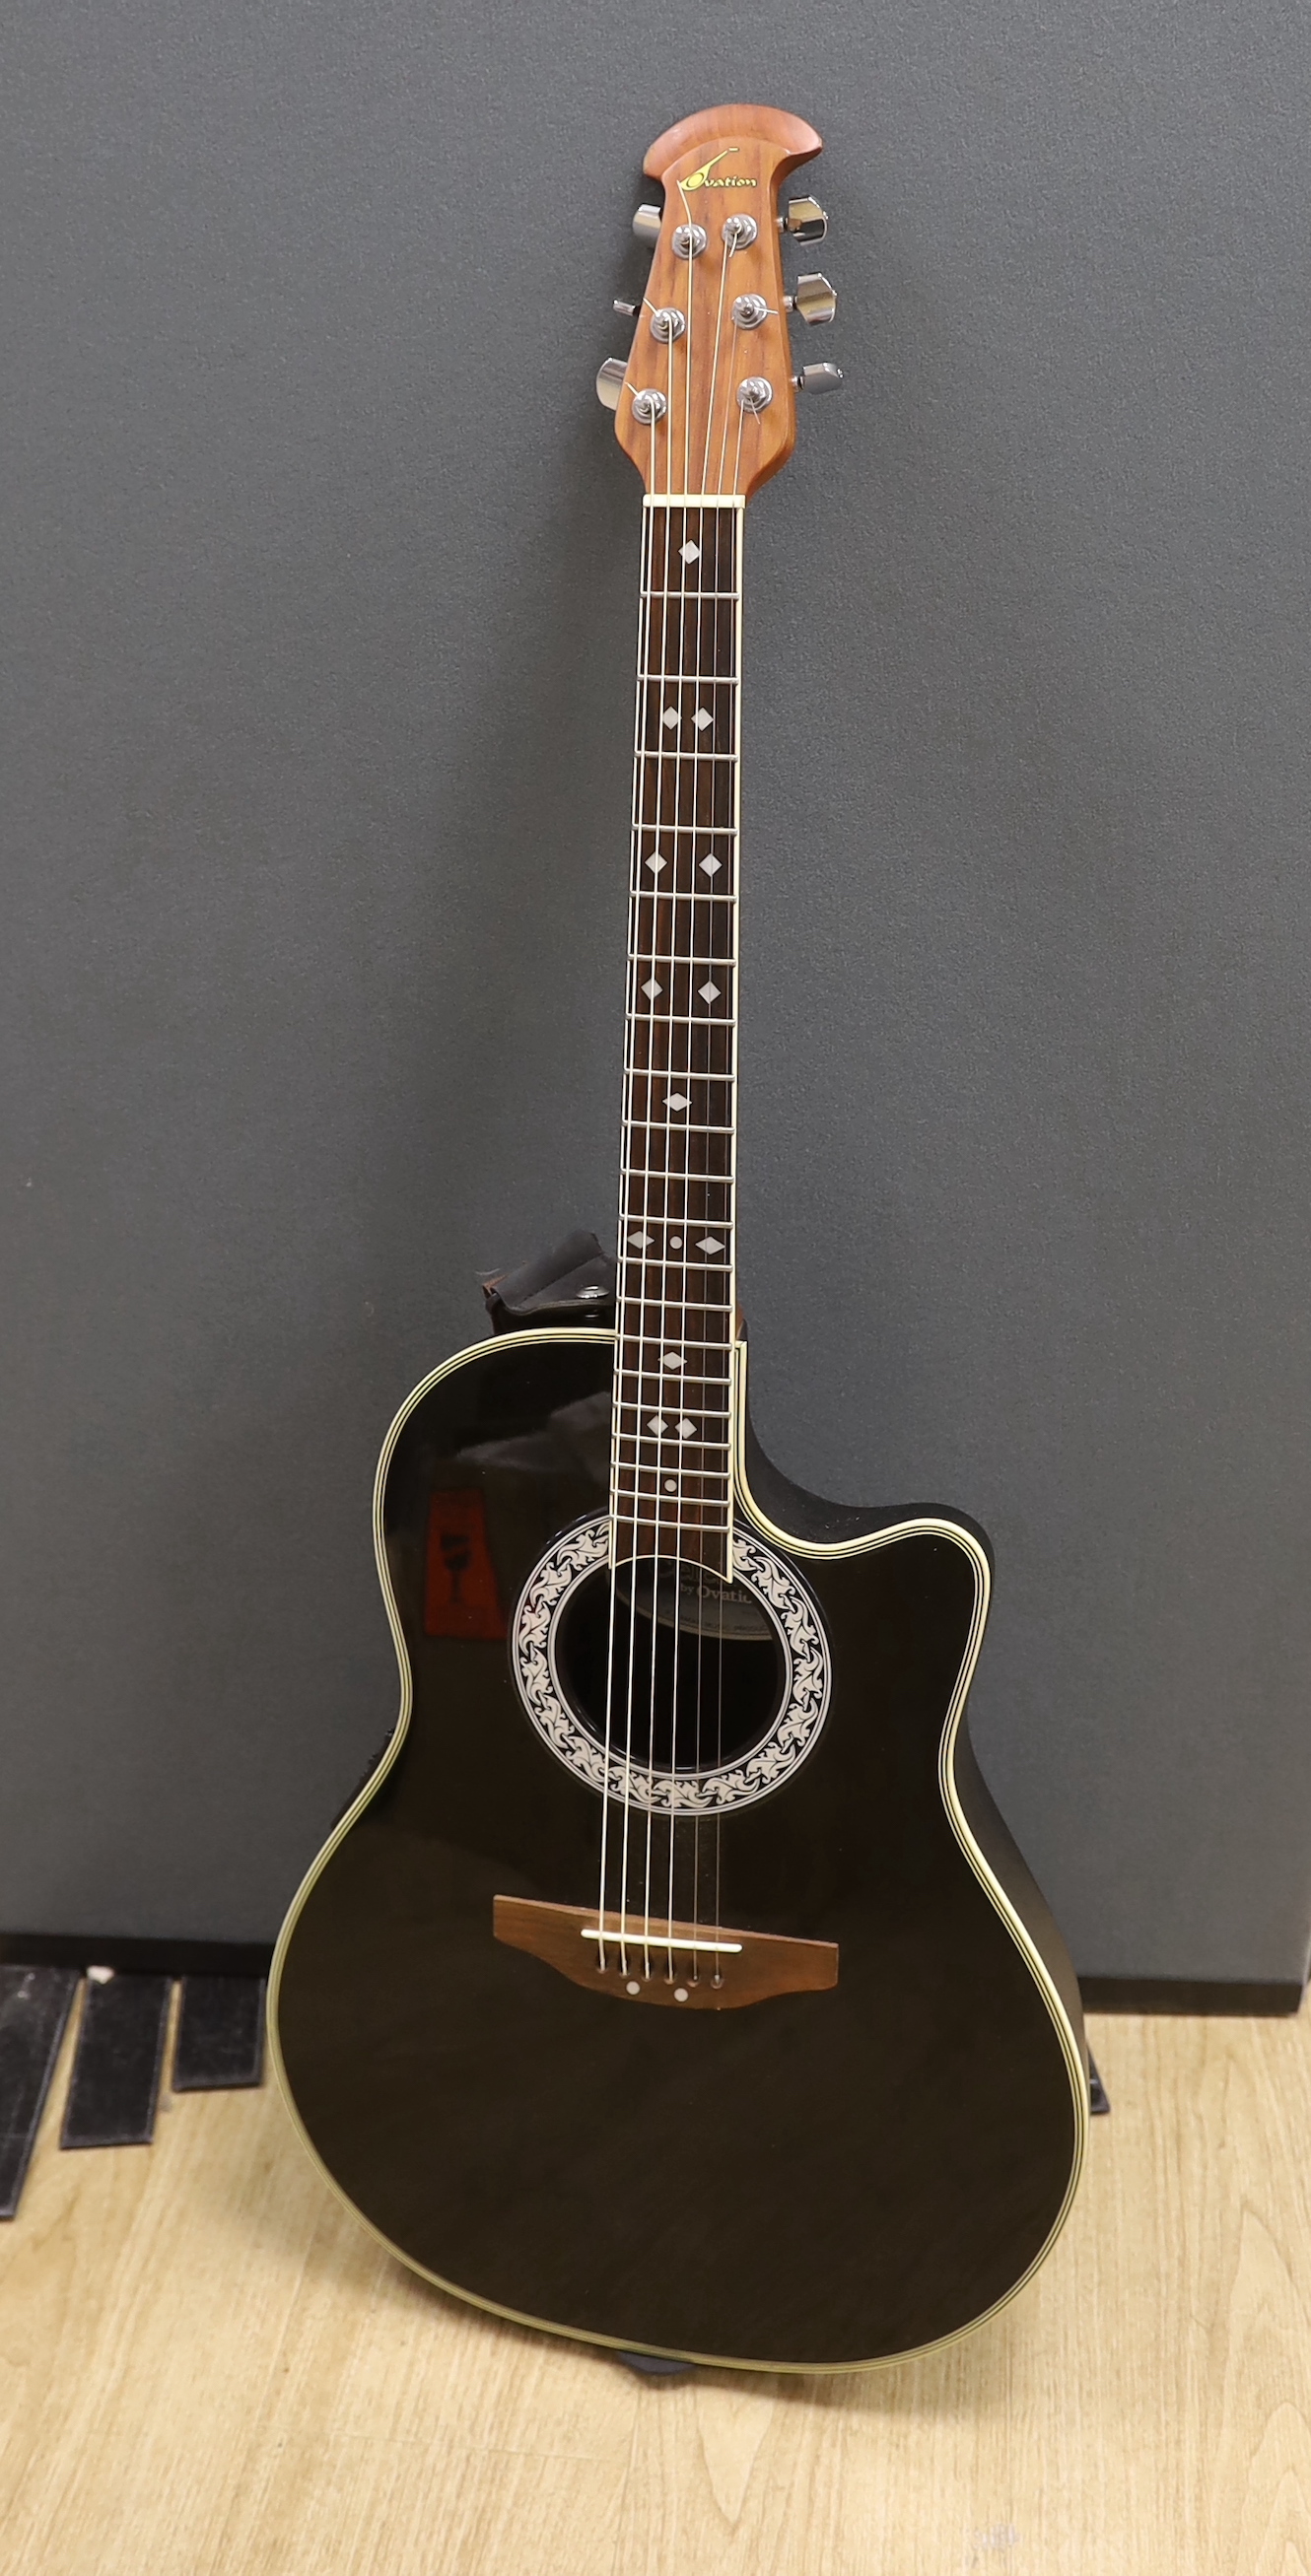 A Celebrity by Ovation electro-acoustic round back guitar with hard case